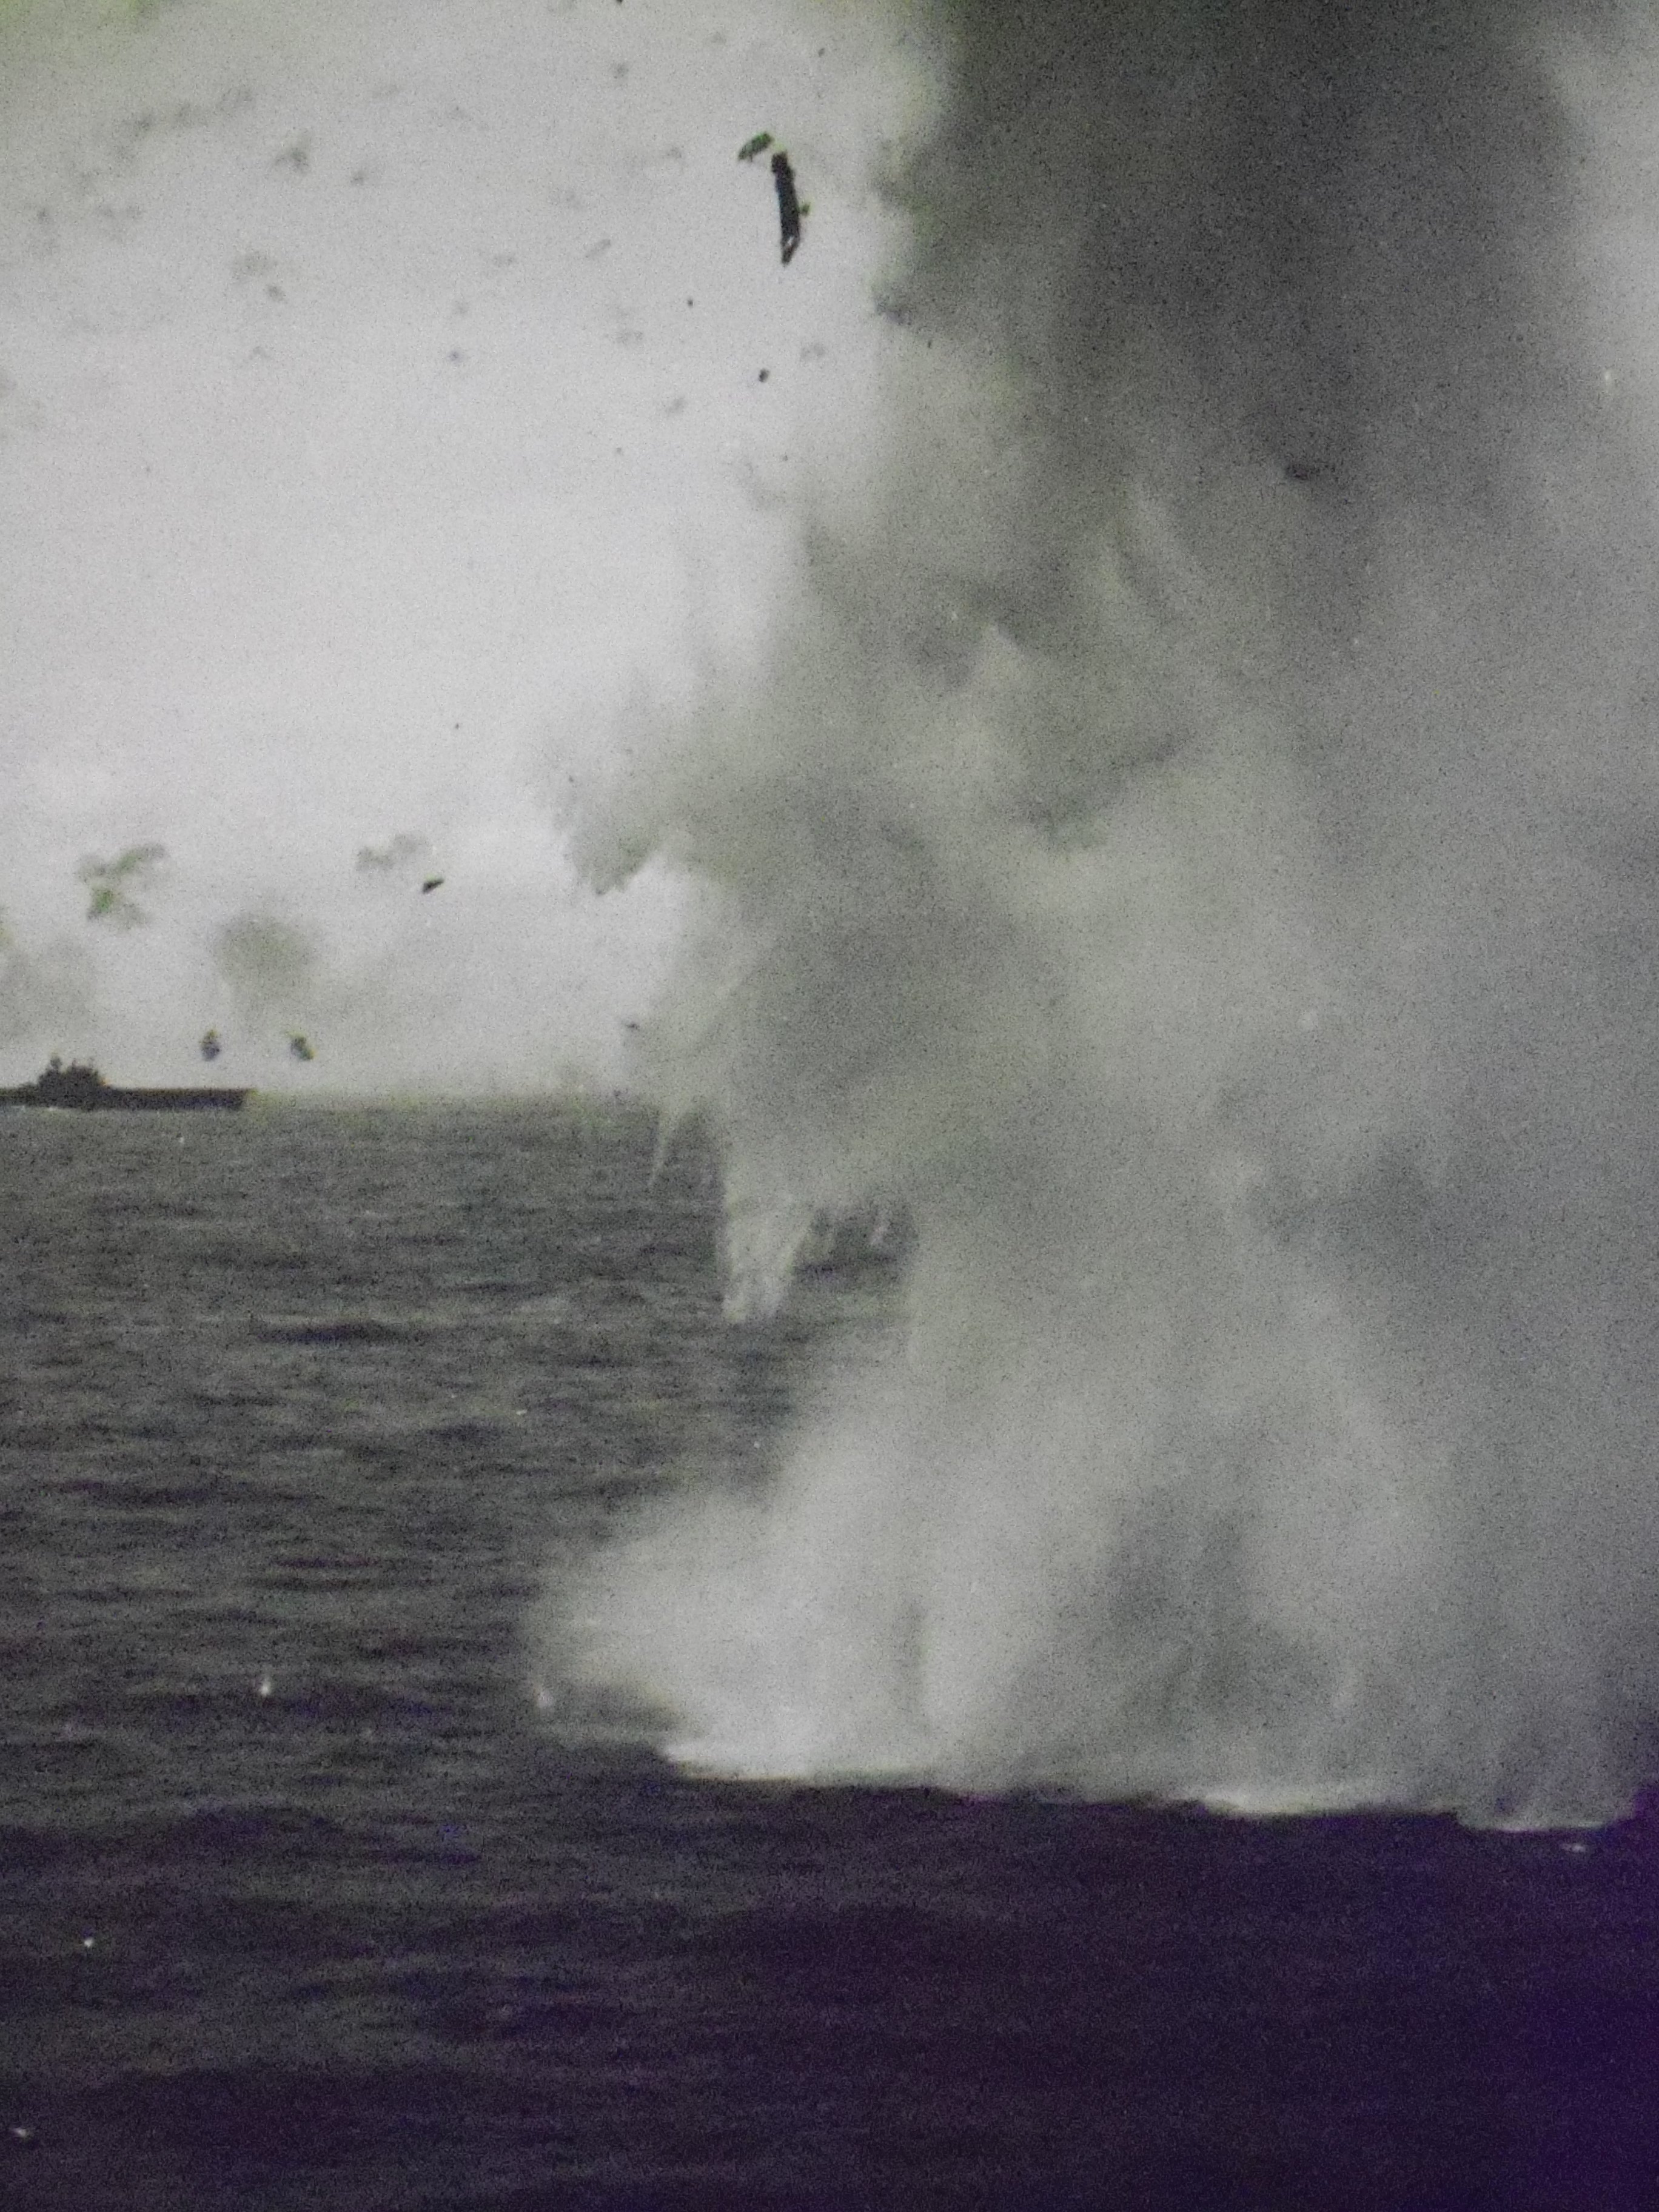 Essex CV-9 062 MP Kamikaze crashes off the stbd side. Enterprise can be seen in the background...JPG